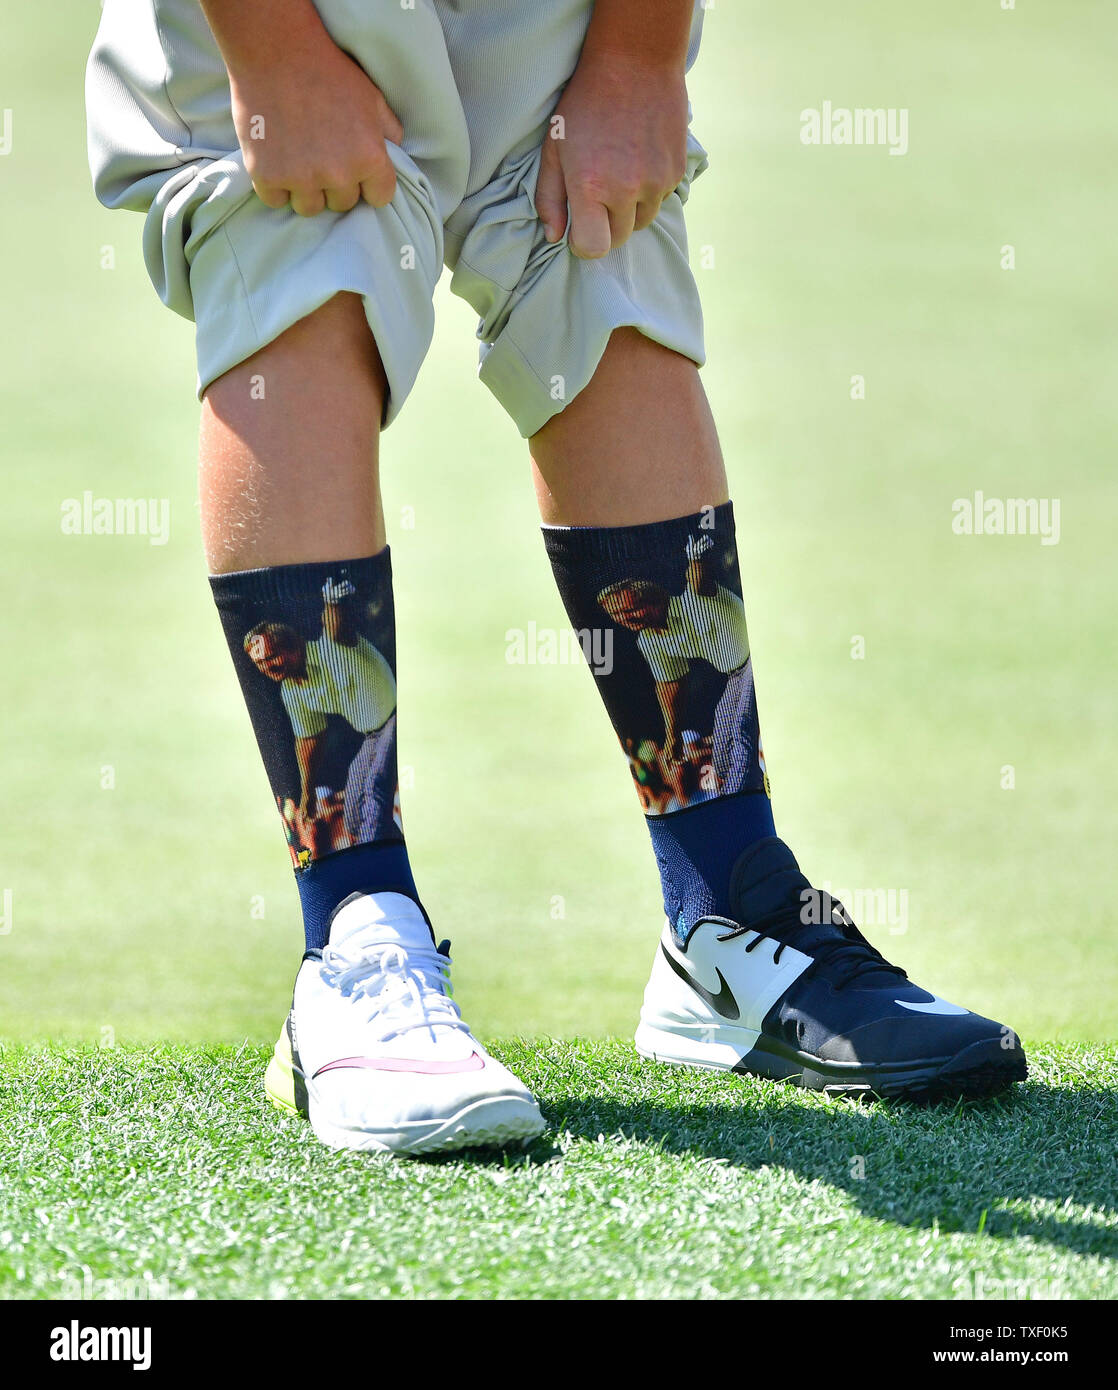 P.J. May bank III shows off his Jack Nicklaus themed socks during the Drive Chip & Putt National Finals at Augusta National Golf Club during Masters week on April 1, 2018 in Augusta, Georgia. Photo by Kevin Dietsch/UPI Stock Photo